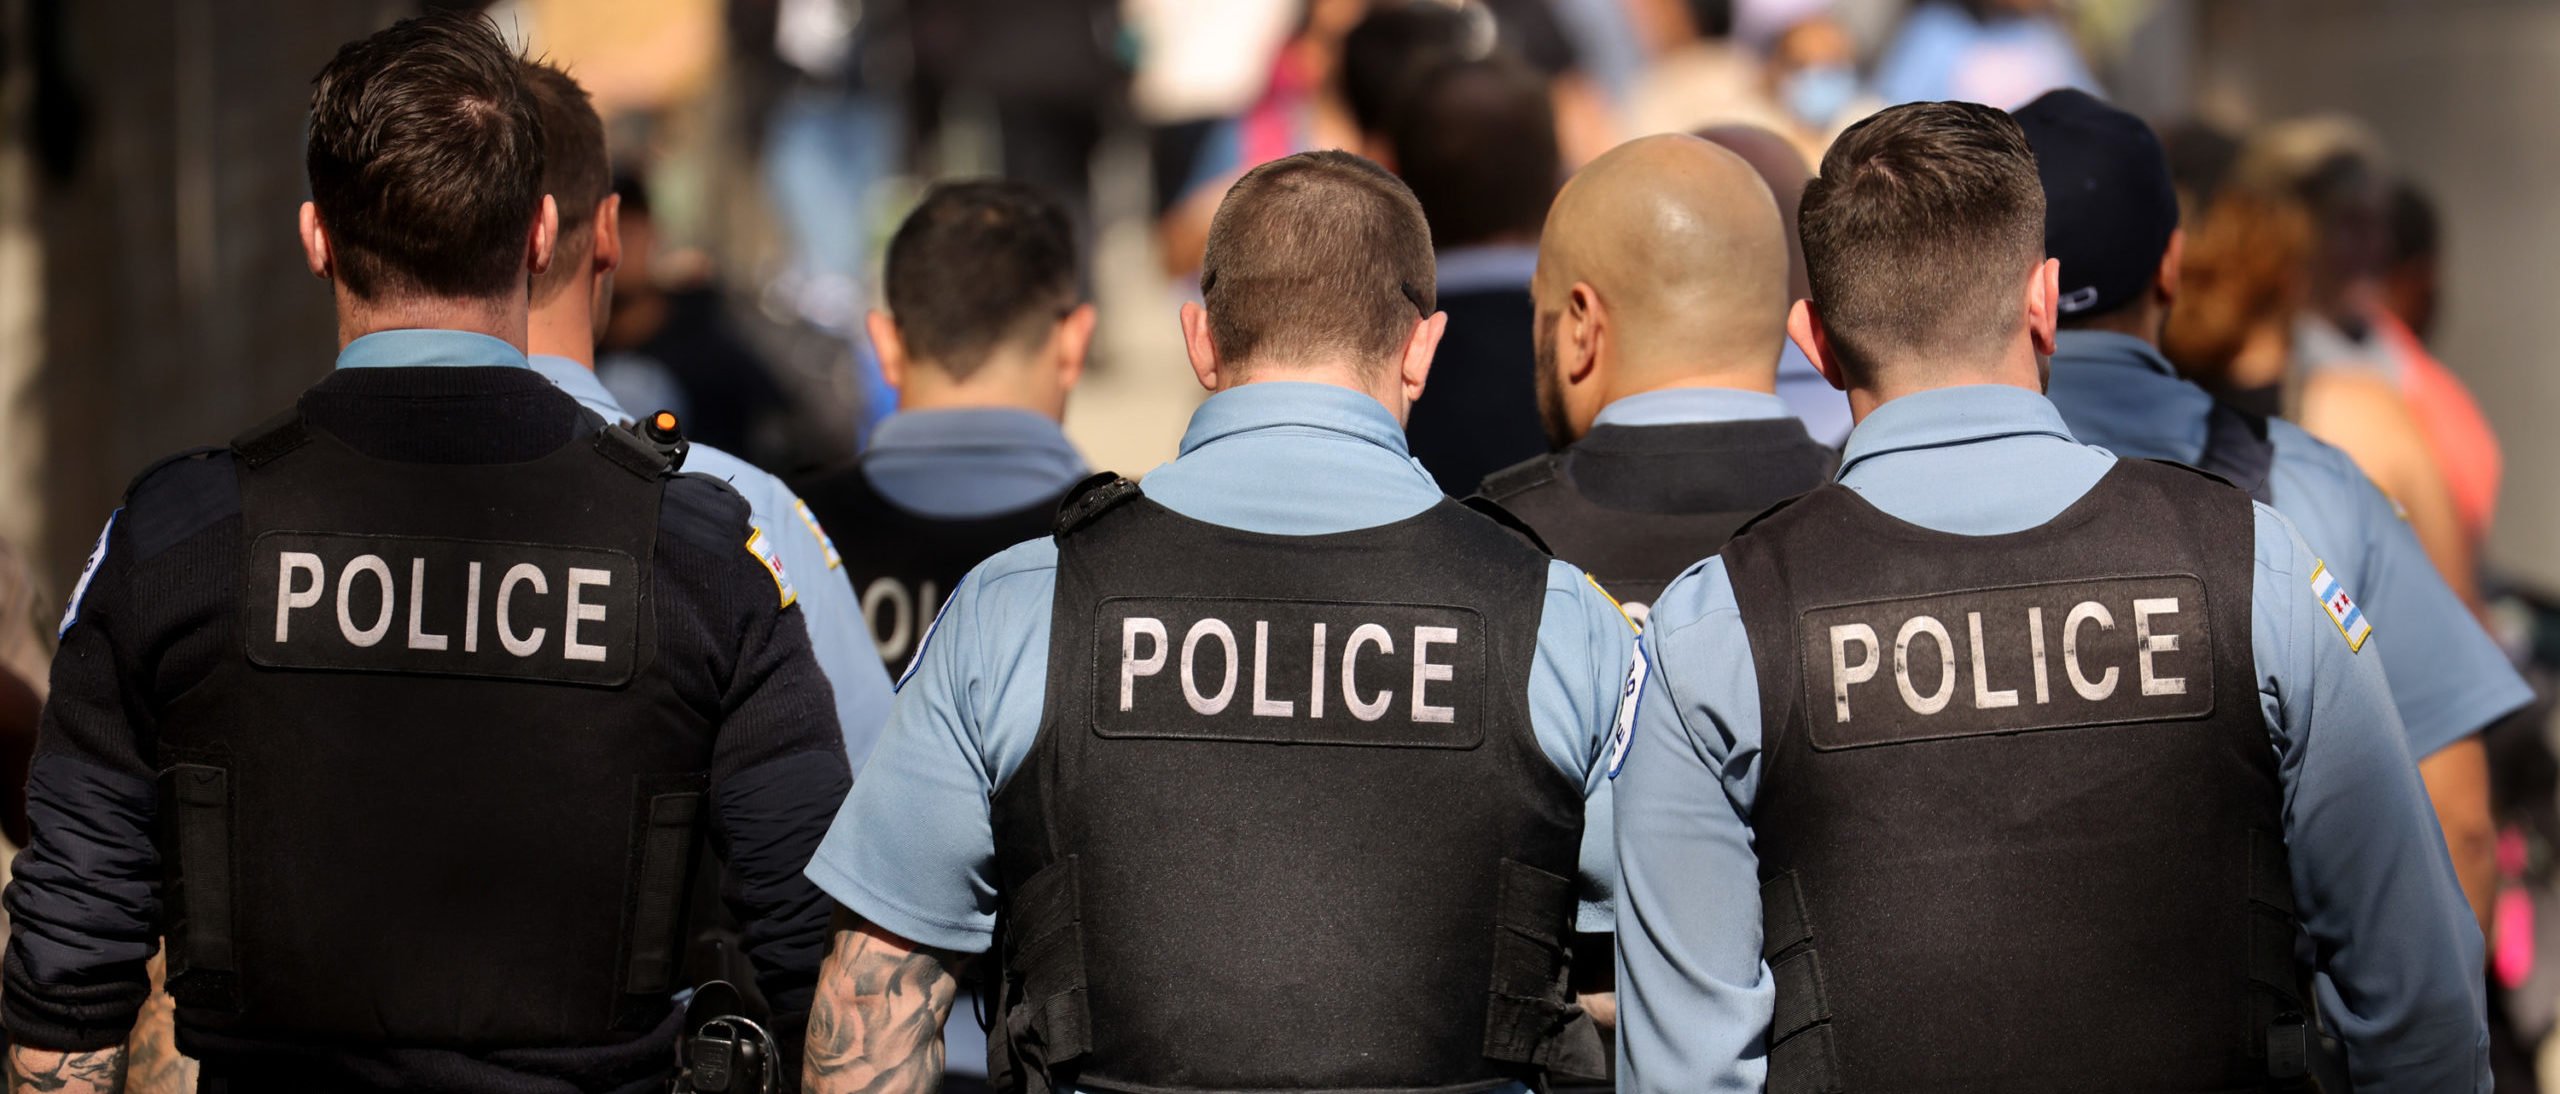 Americans' support for more police spending in their area is